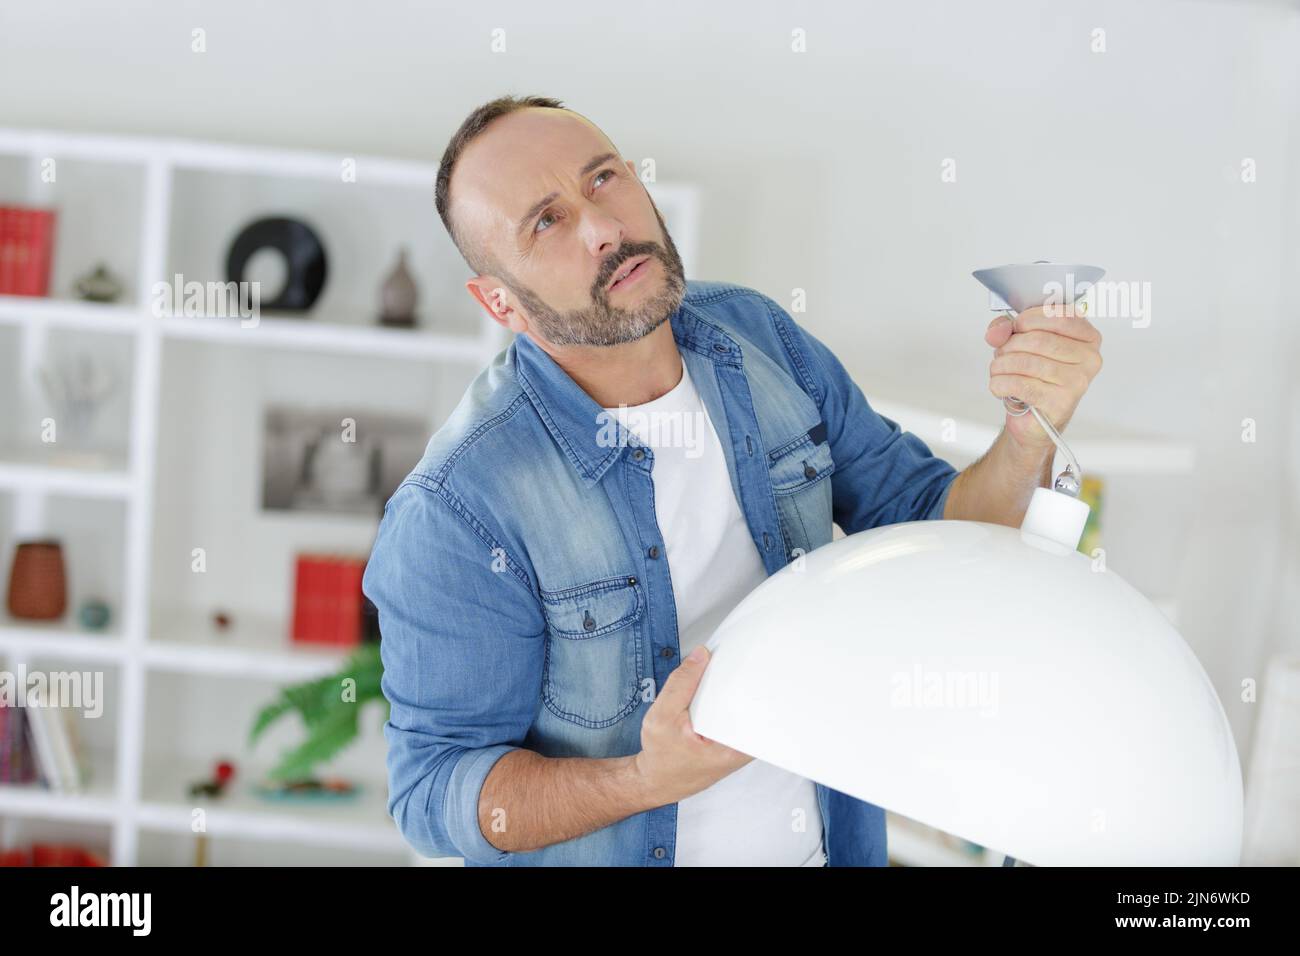 a man is fixing lamps Stock Photo